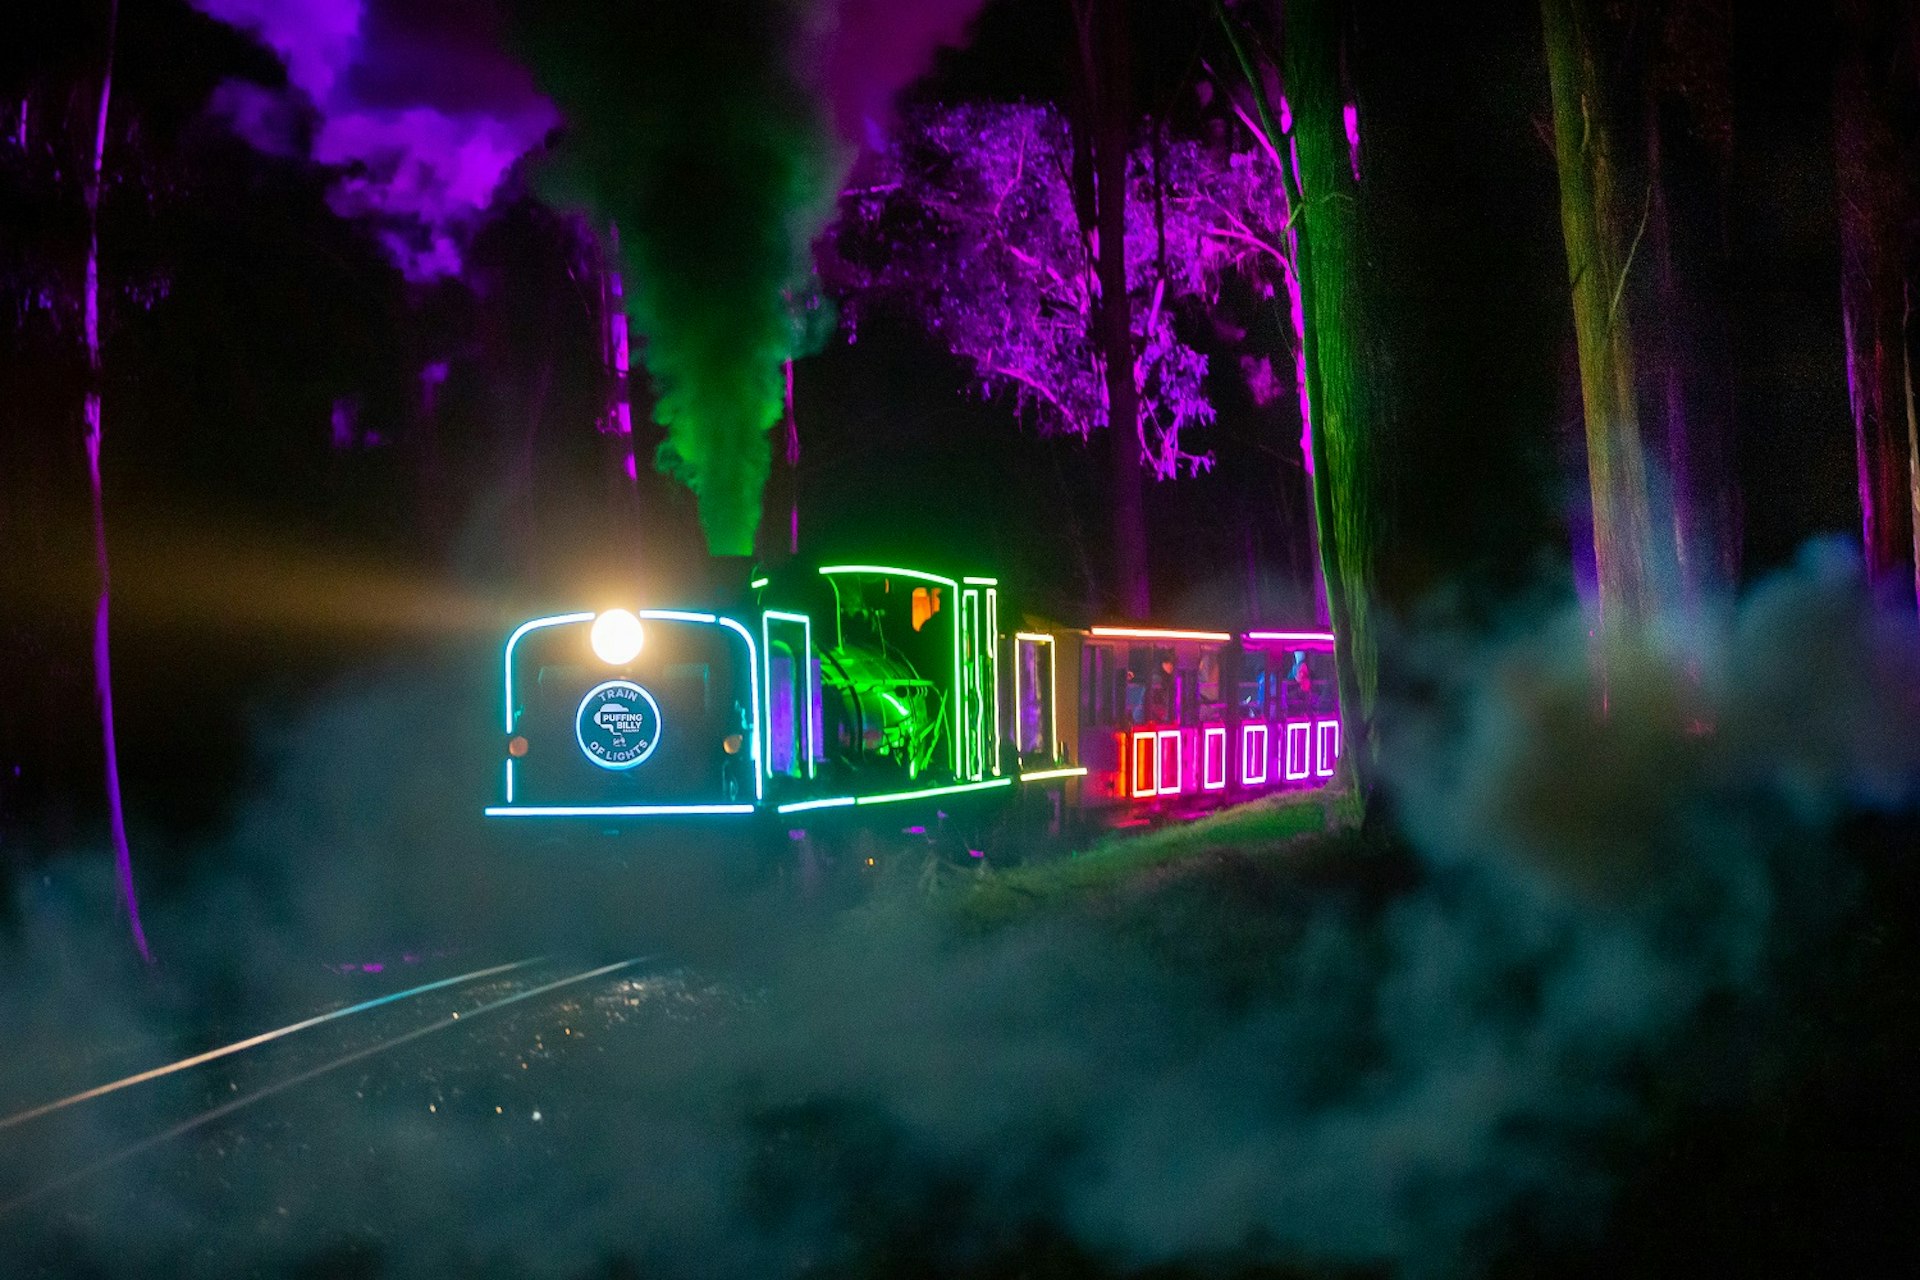 Train of Lights showing the Puffing Billy steam train lit up with neon lights